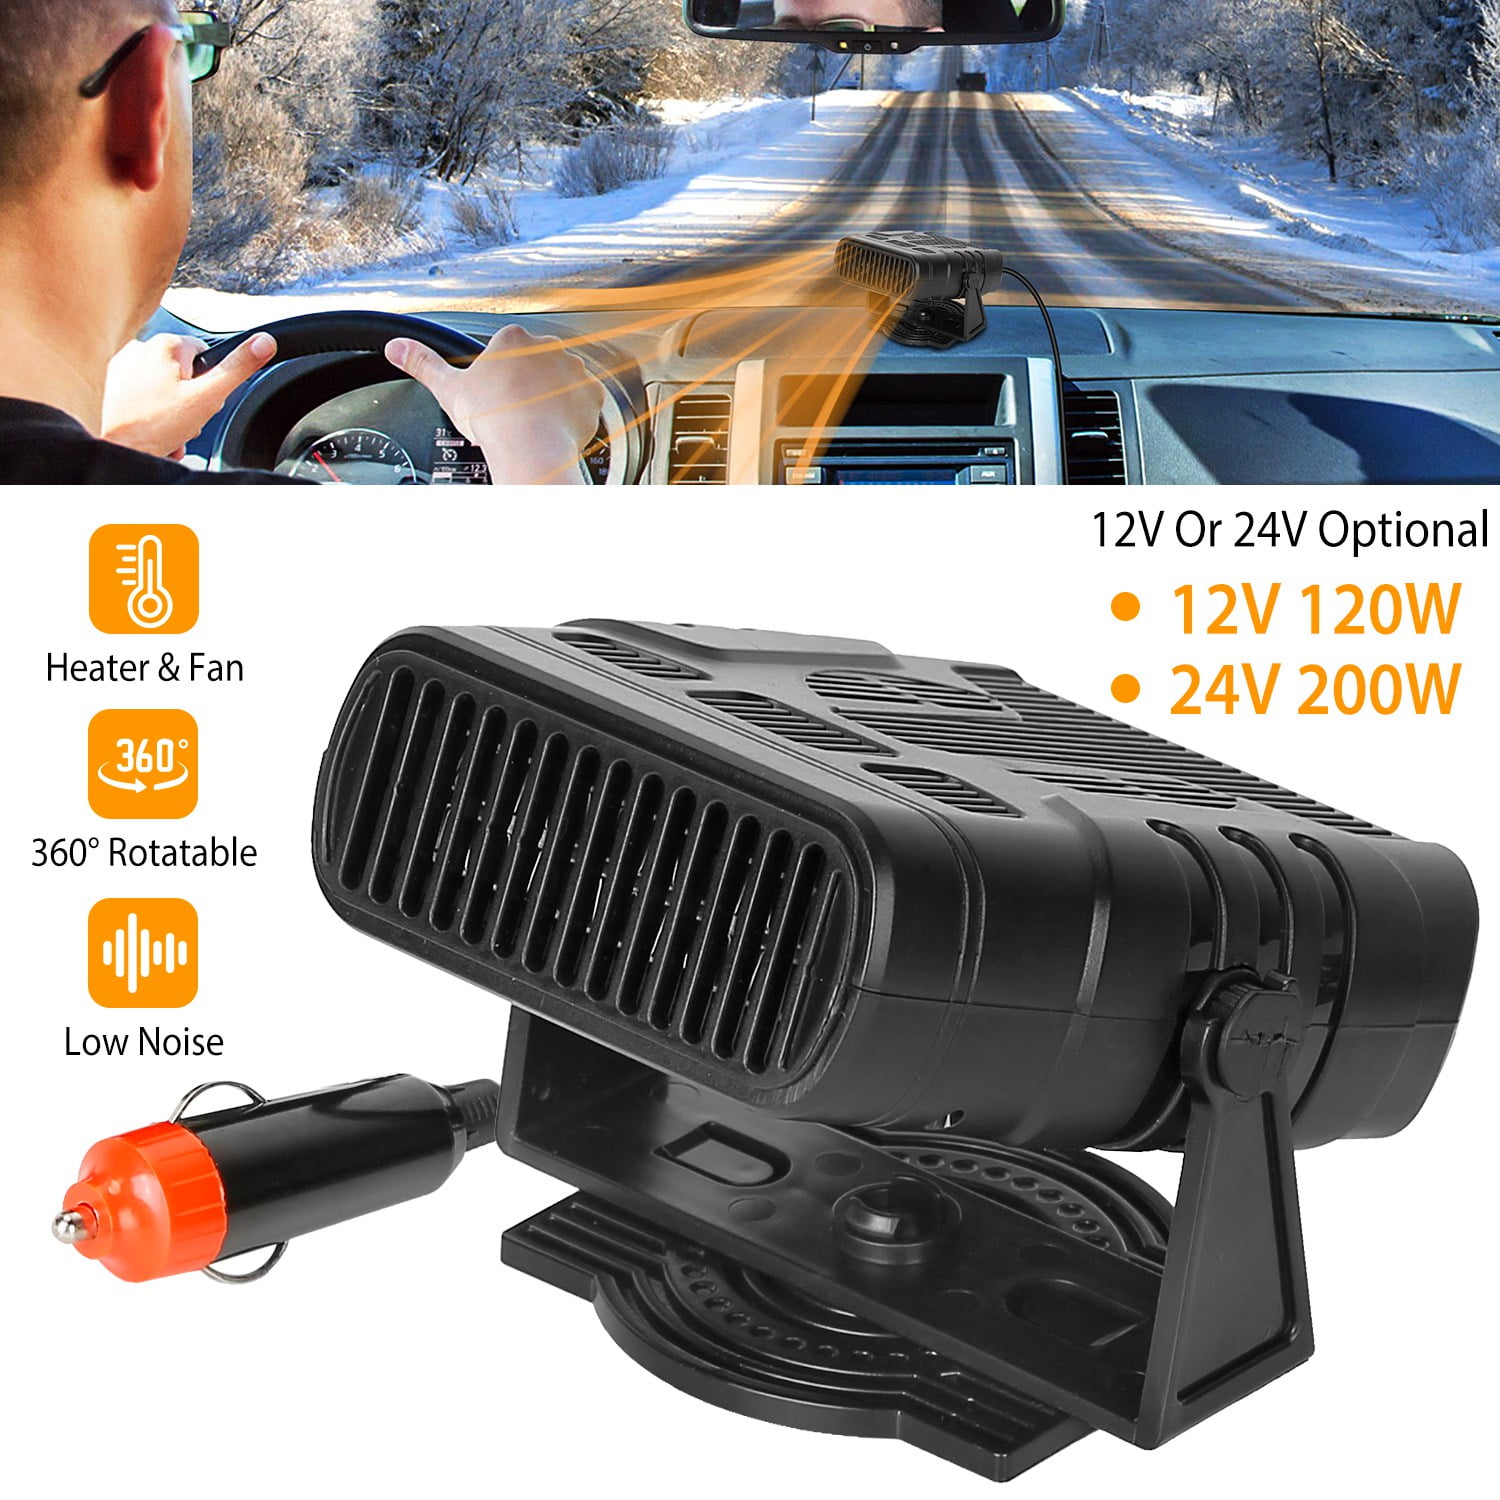 2 In 1 Car Heater Cooler Fan,12V 120W Portable Electric Cooling Heating Fan Window Demister Windshield Defroster 360° Rotatable 